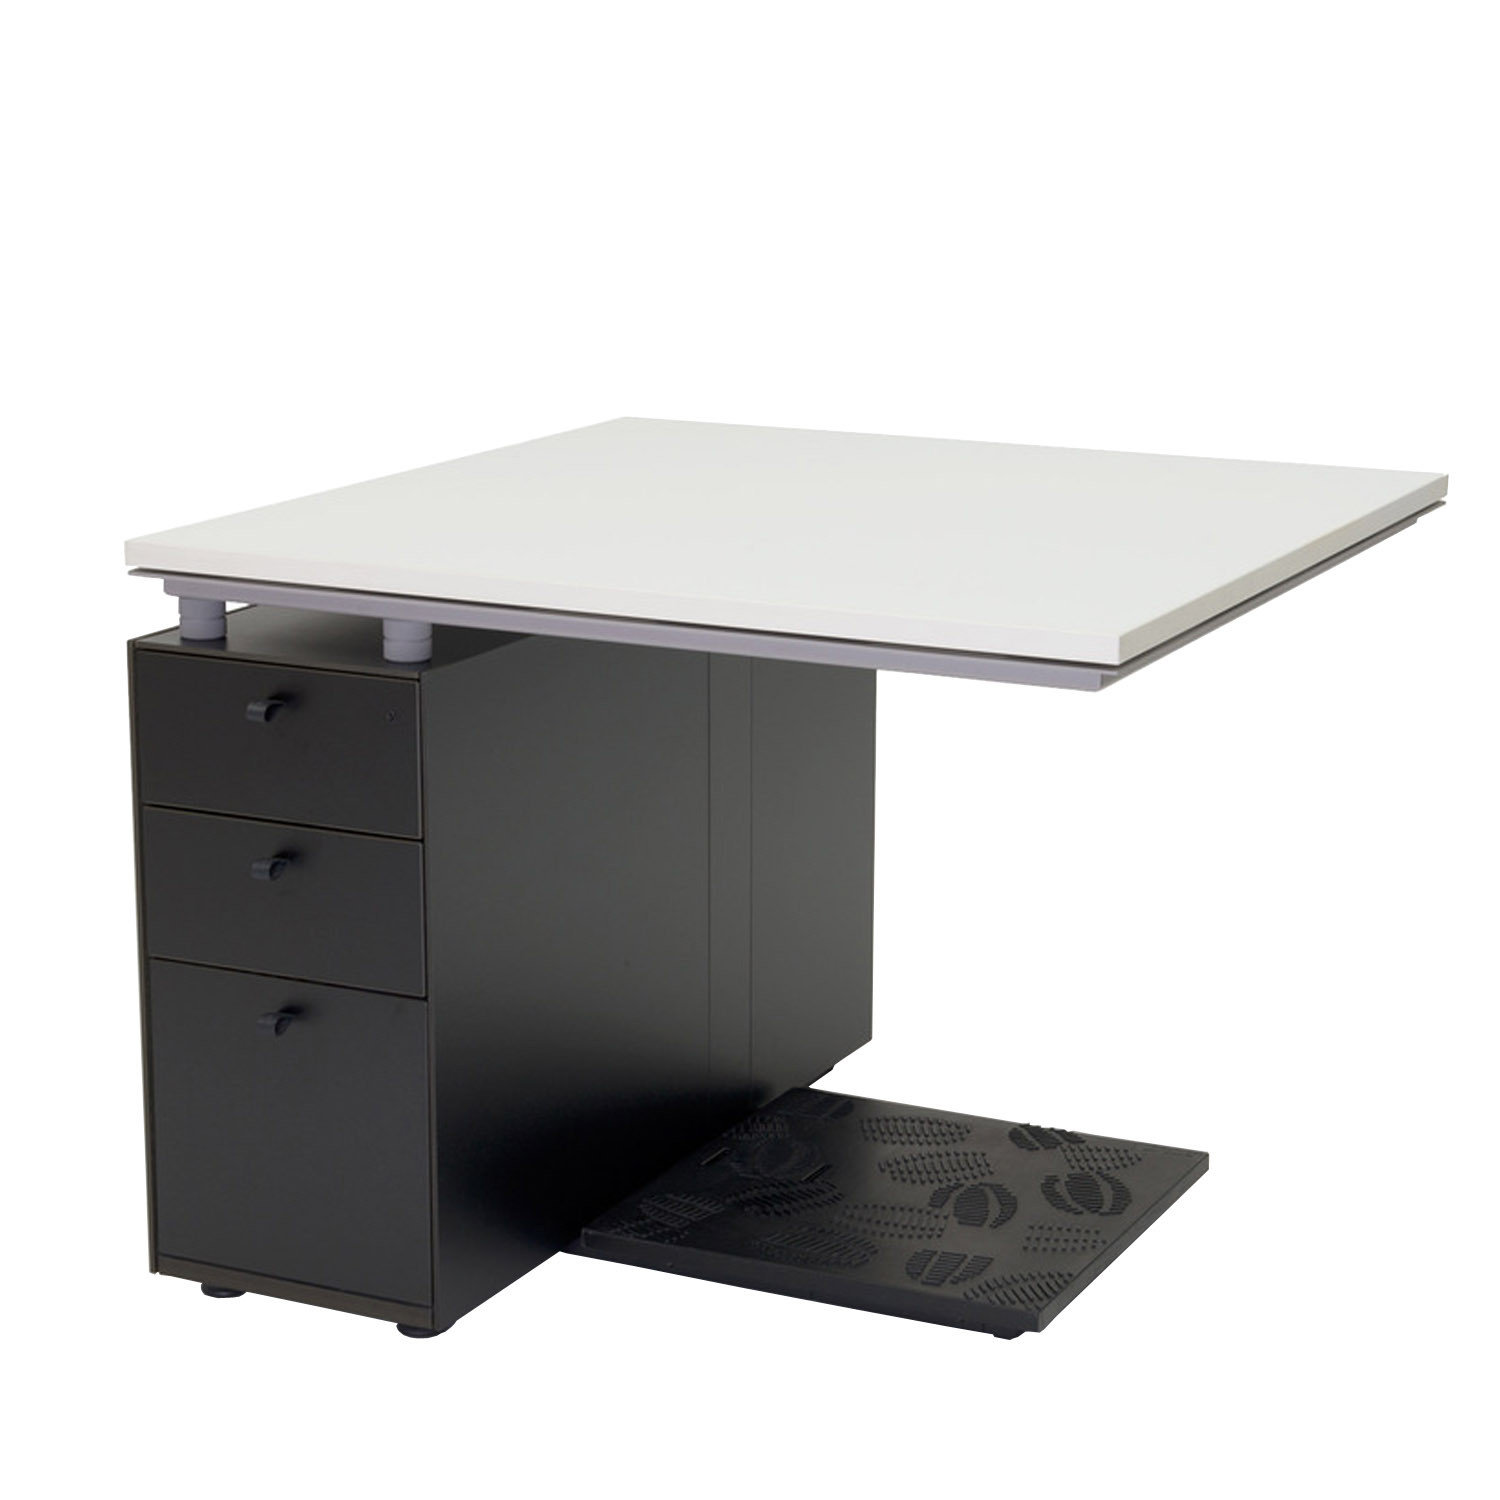 M2 Desk Workstations by Bulo